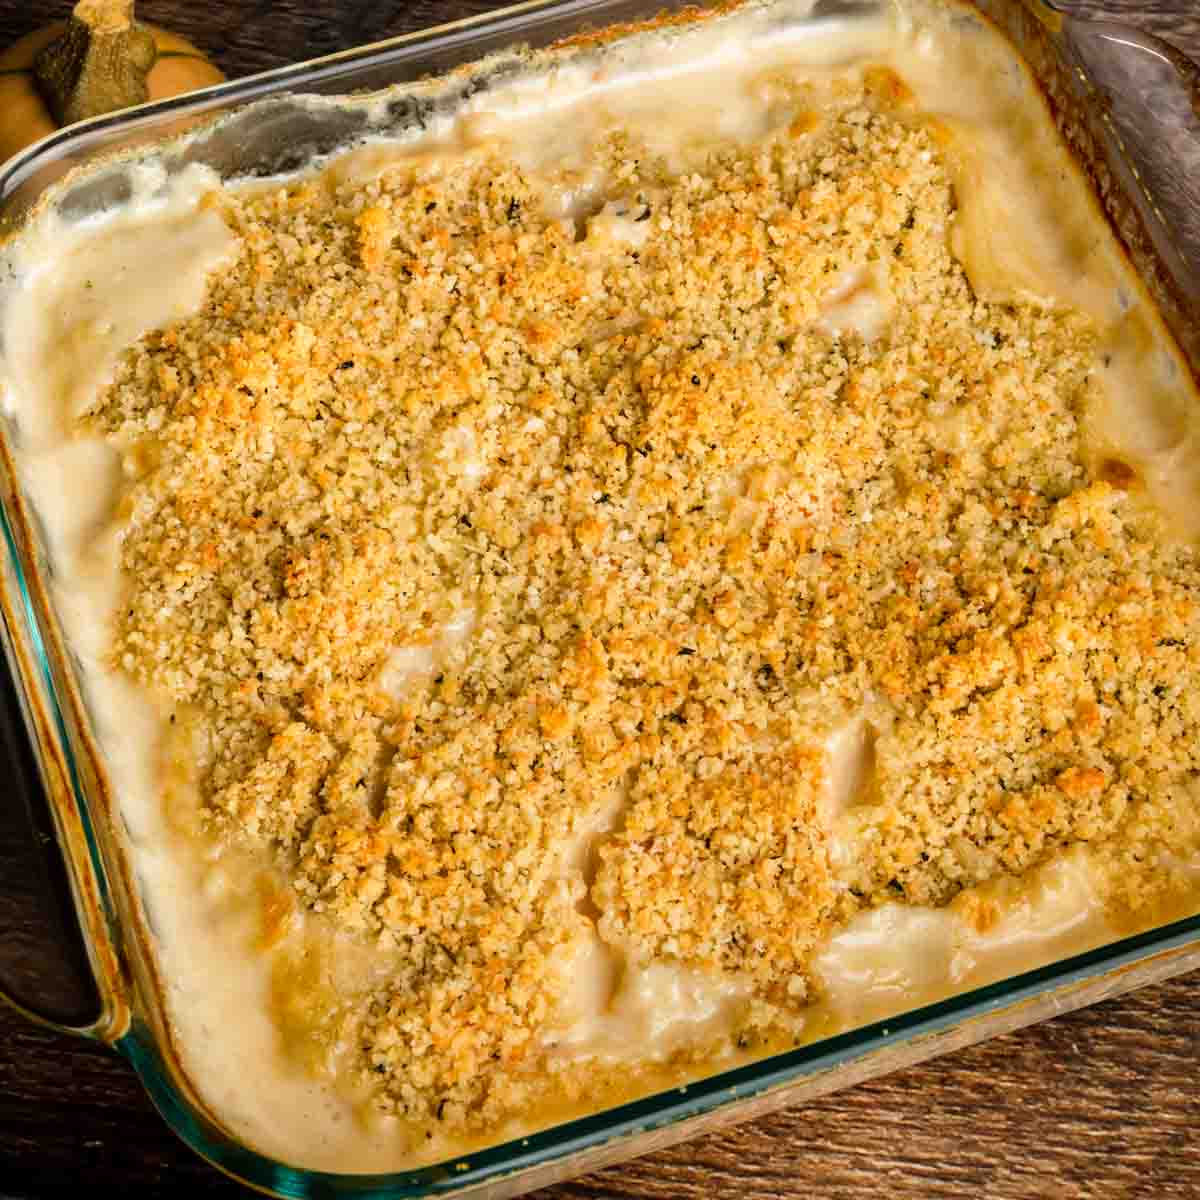 Butternut squash au gratin in a casserole dish covered with toasted breadcrumbs